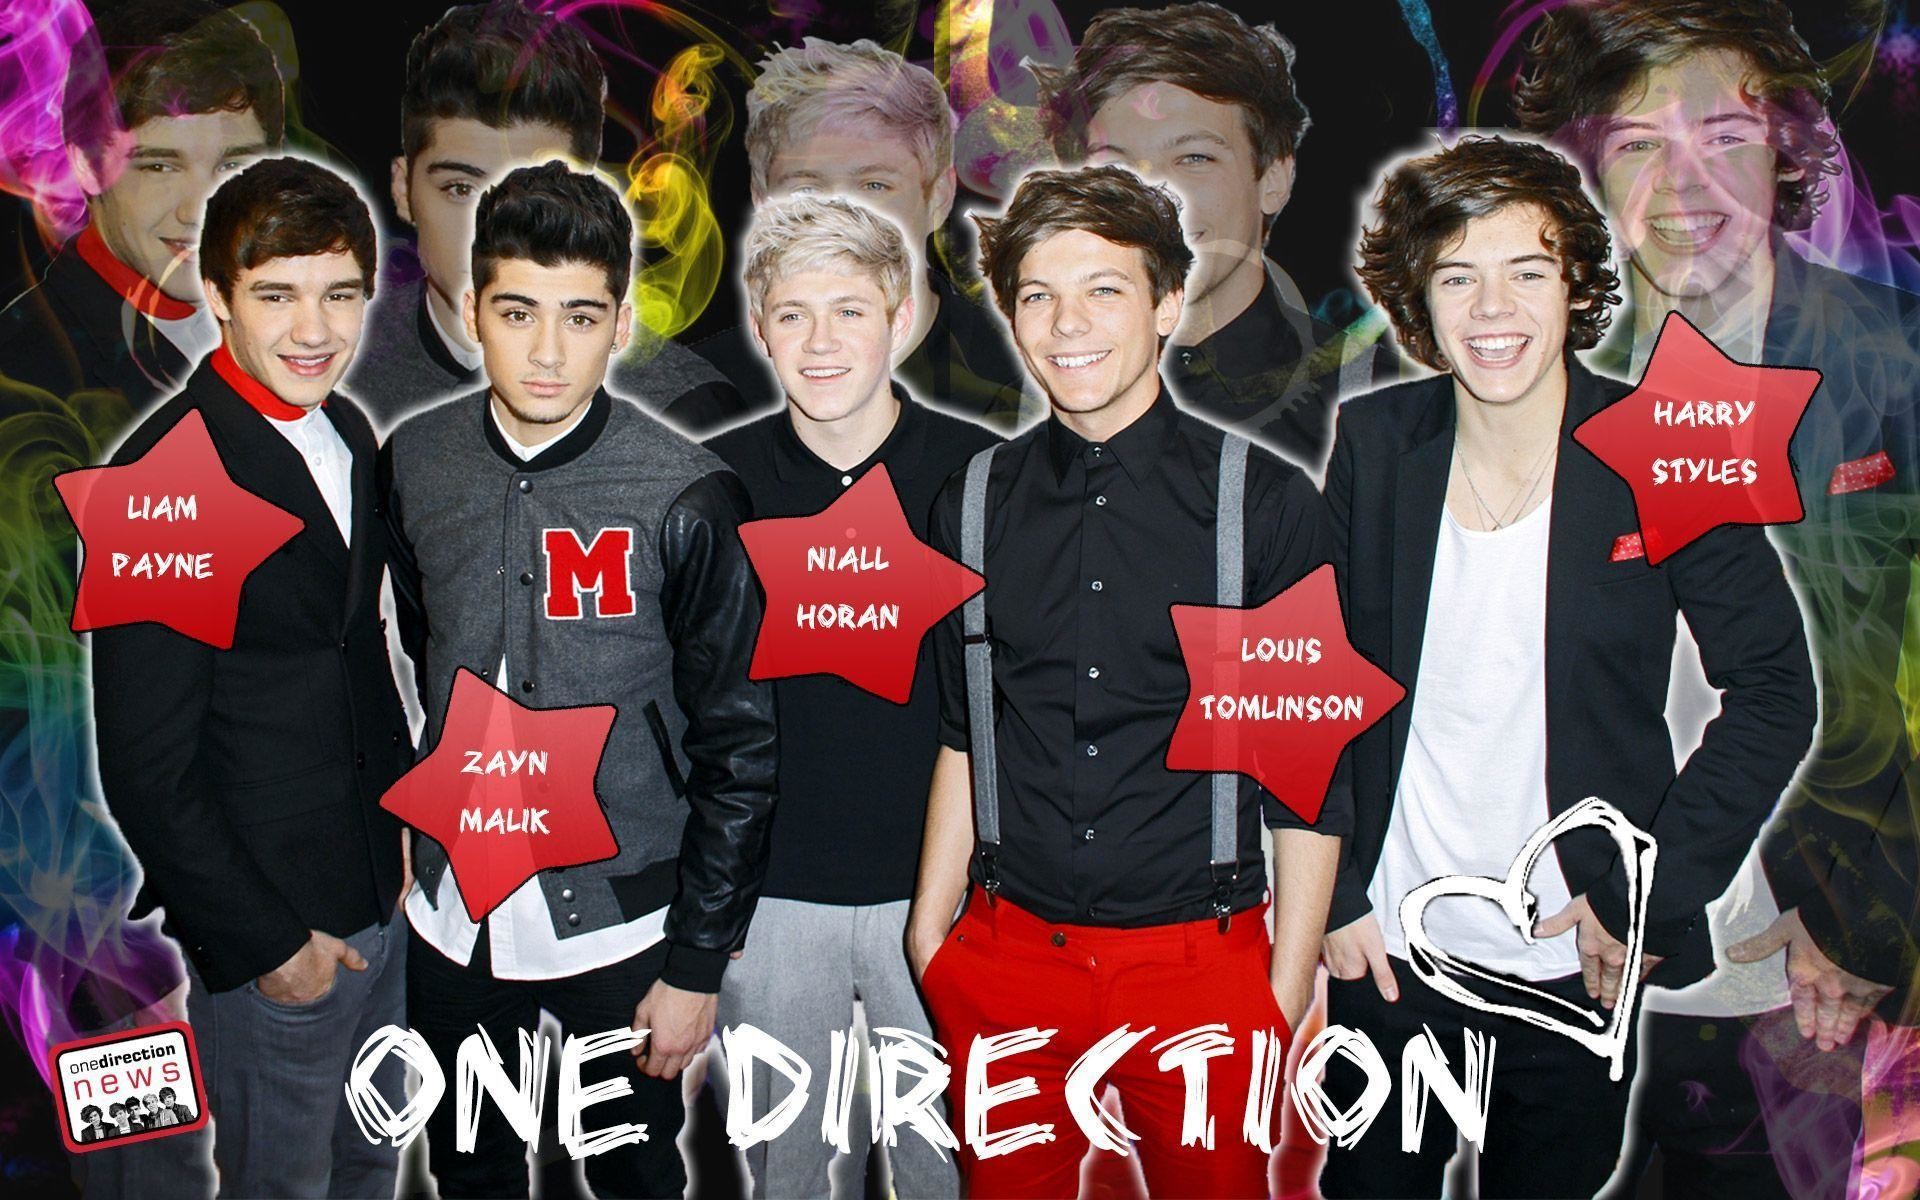 1920x1200 1D One Direction Wallpaper 16 18341 Images HD Wallpapers| Wallfoy.com